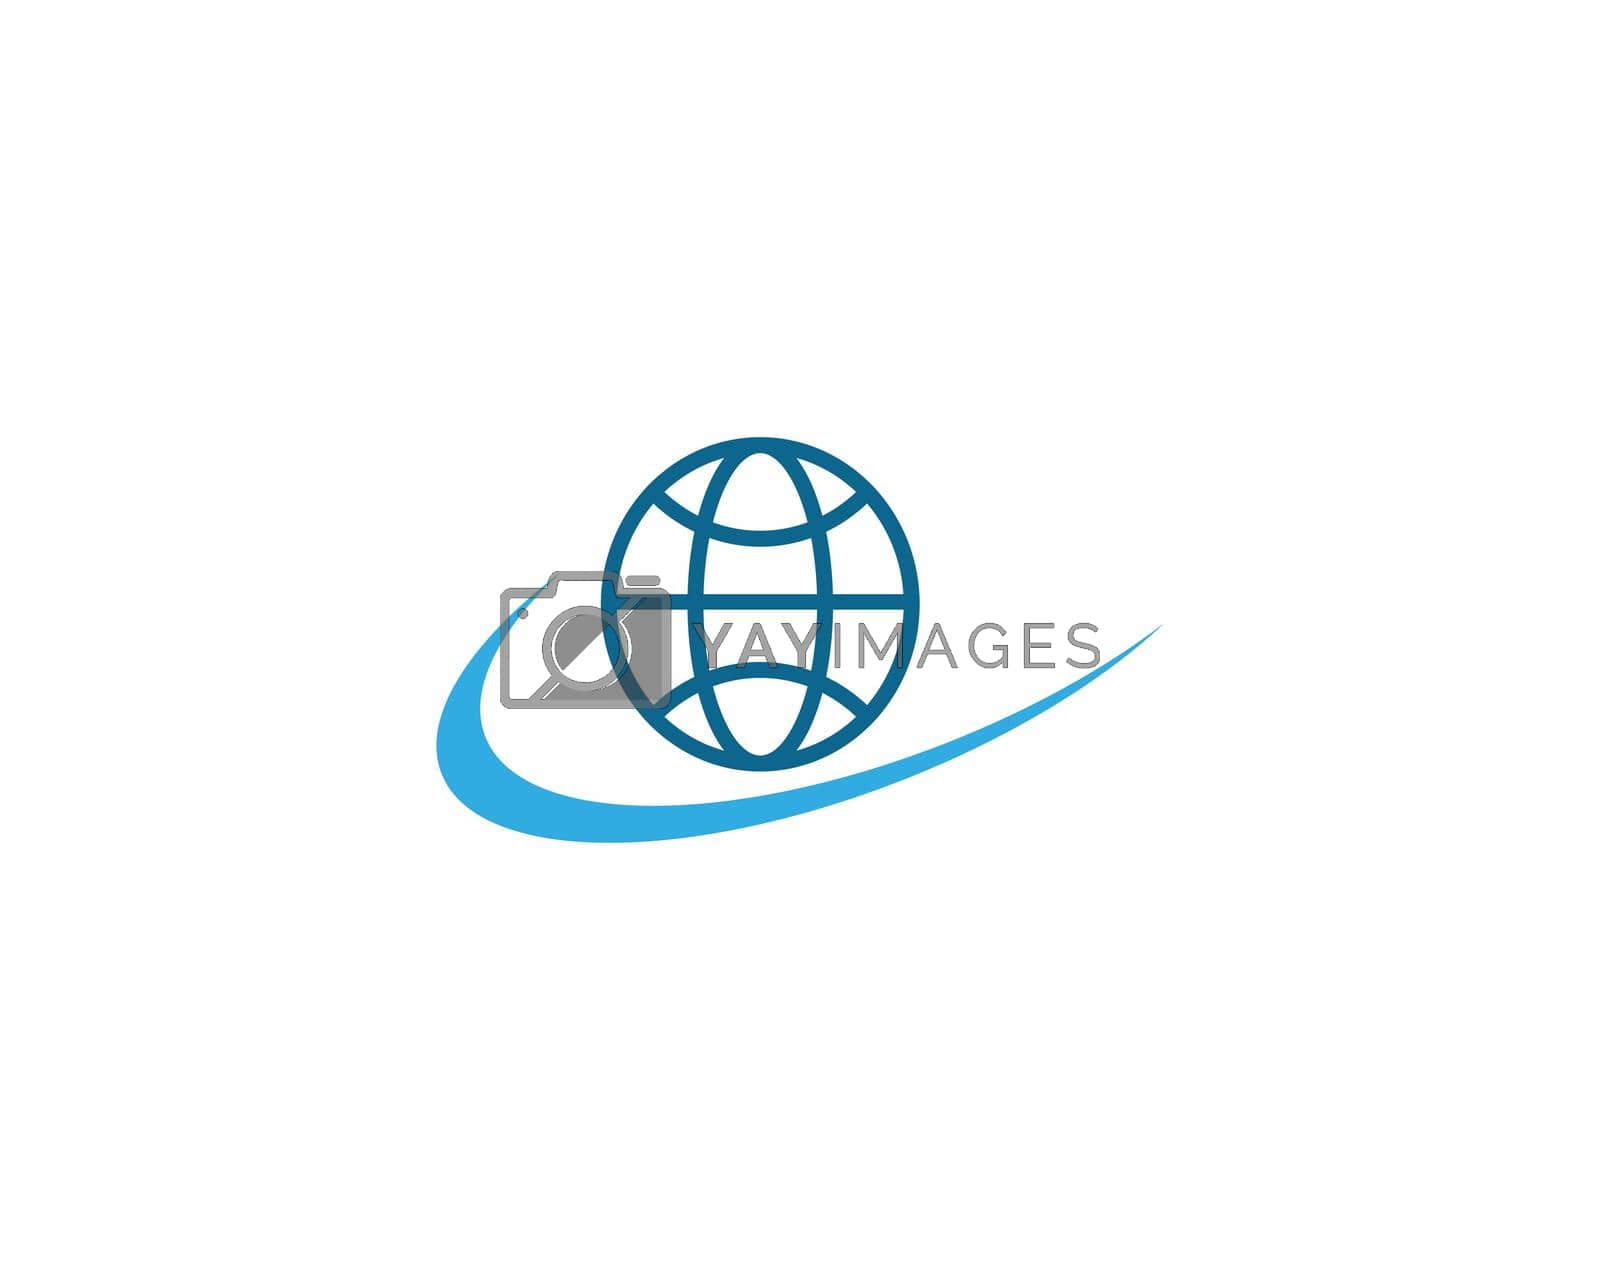 Royalty free image of globe ilustration logo vector by awk